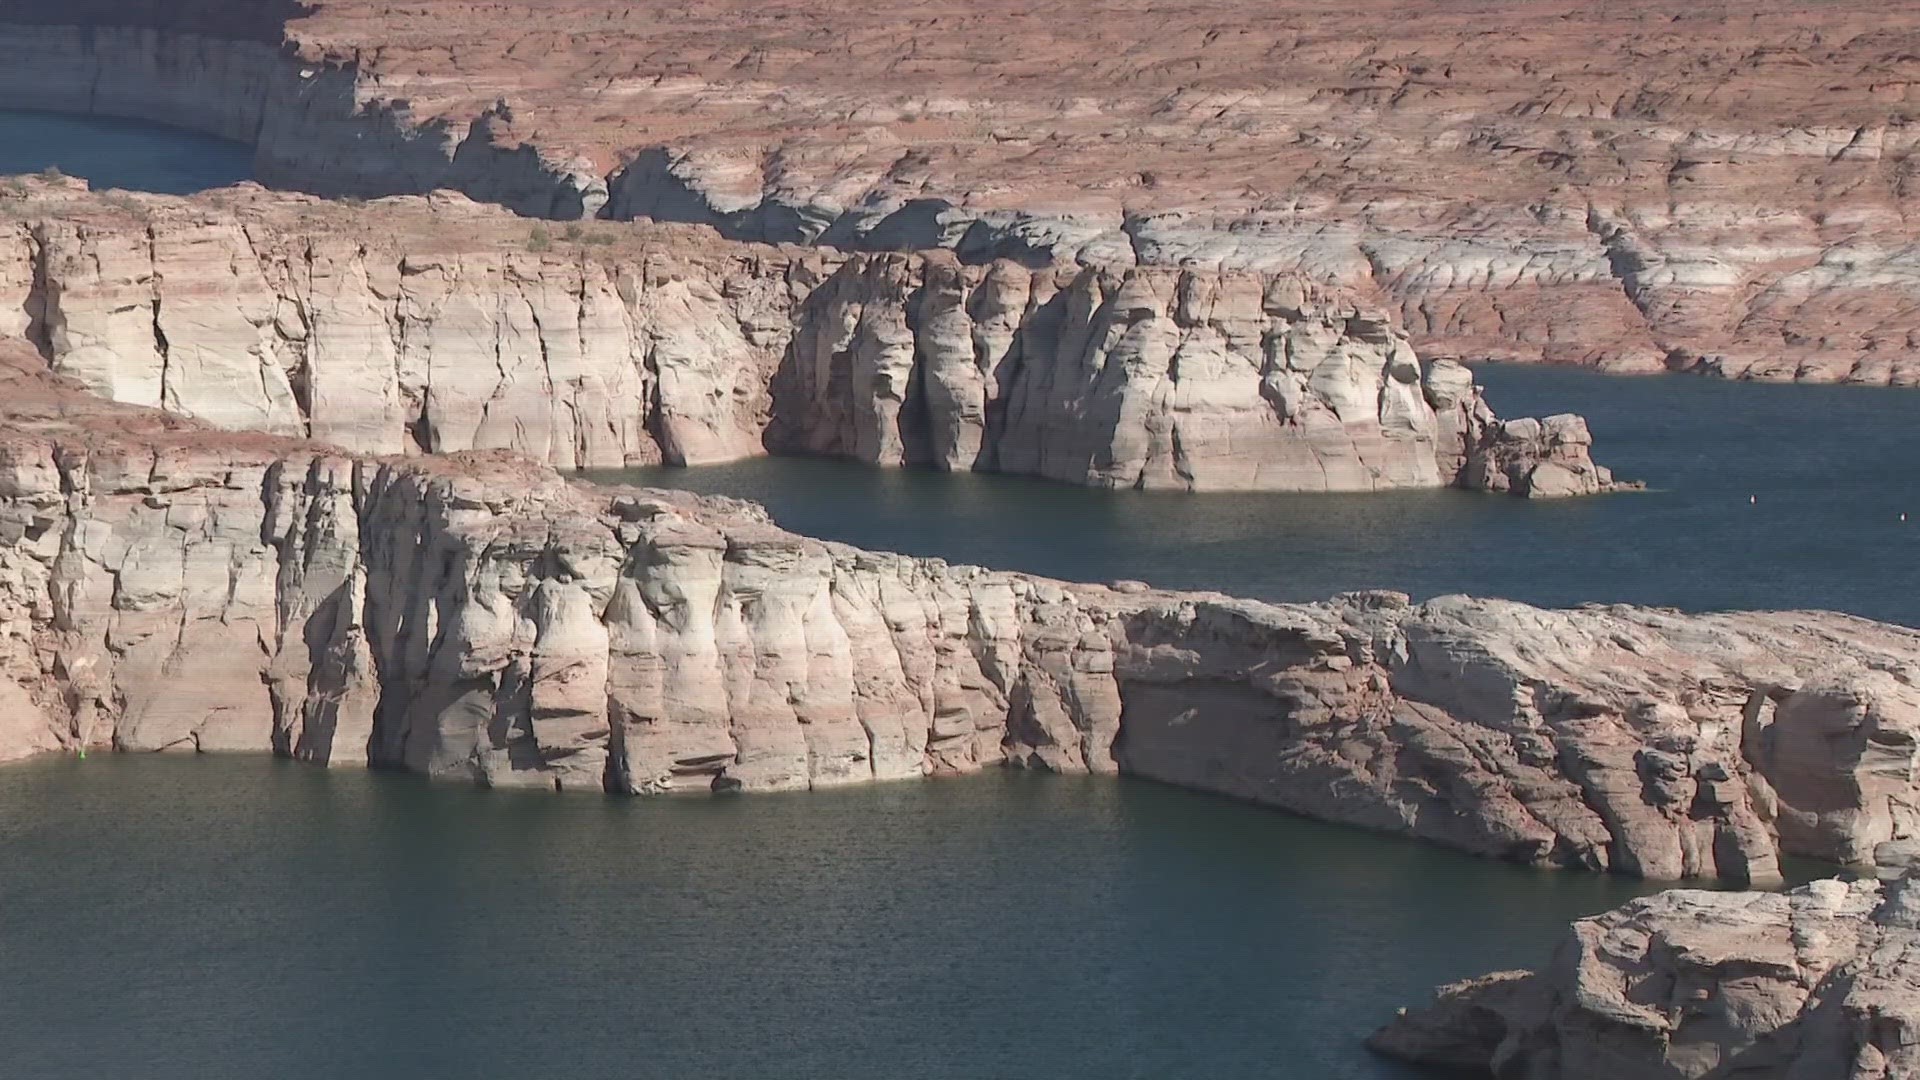 After months of negotiation and consideration, the Bureau of Reclamation released its final plan for managing the Colorado River through 2026.